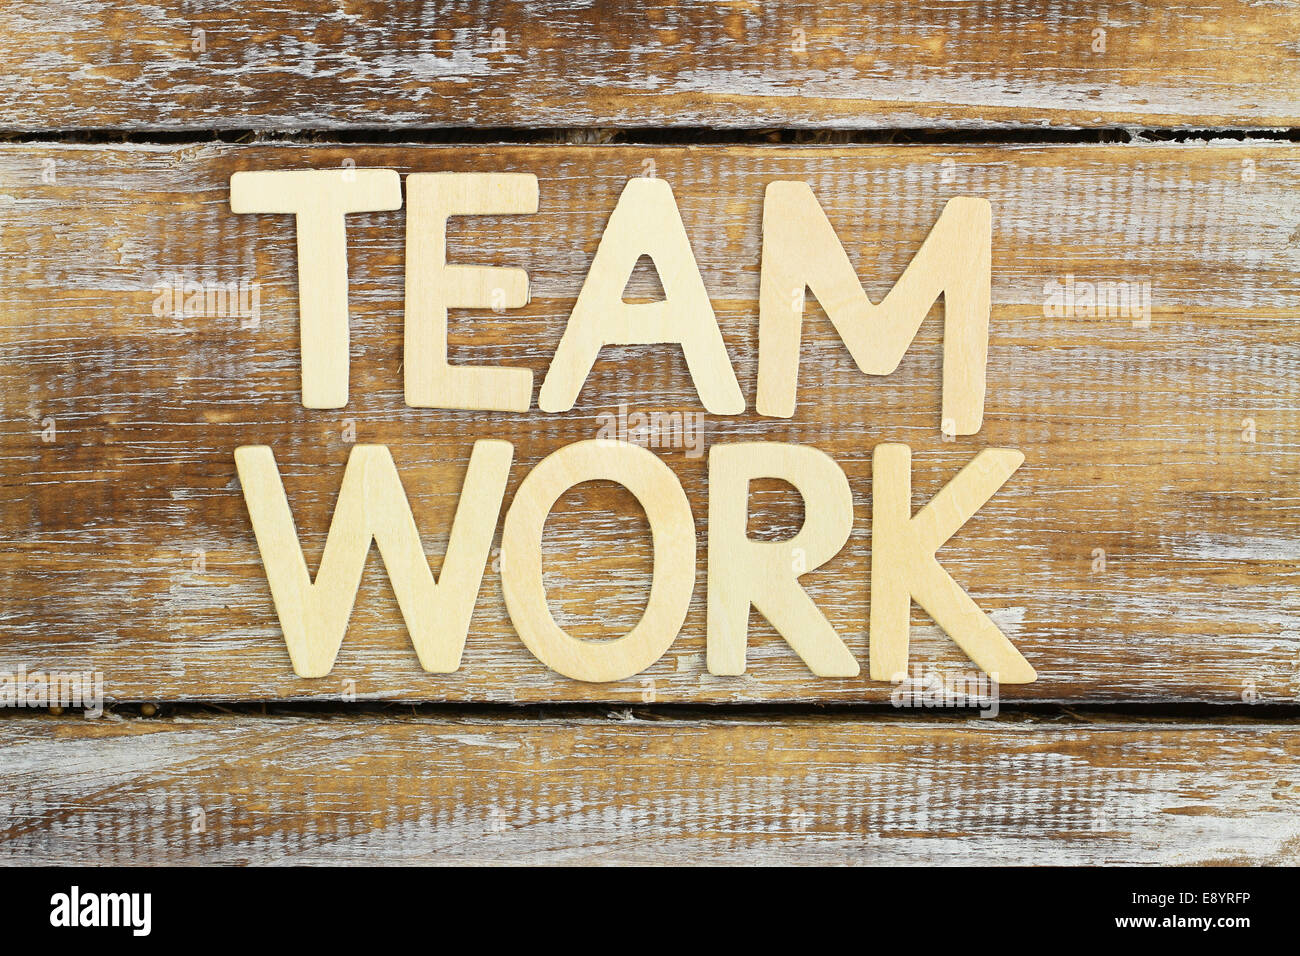 'Team work' written with wooden letters on rustic wooden surface Stock Photo